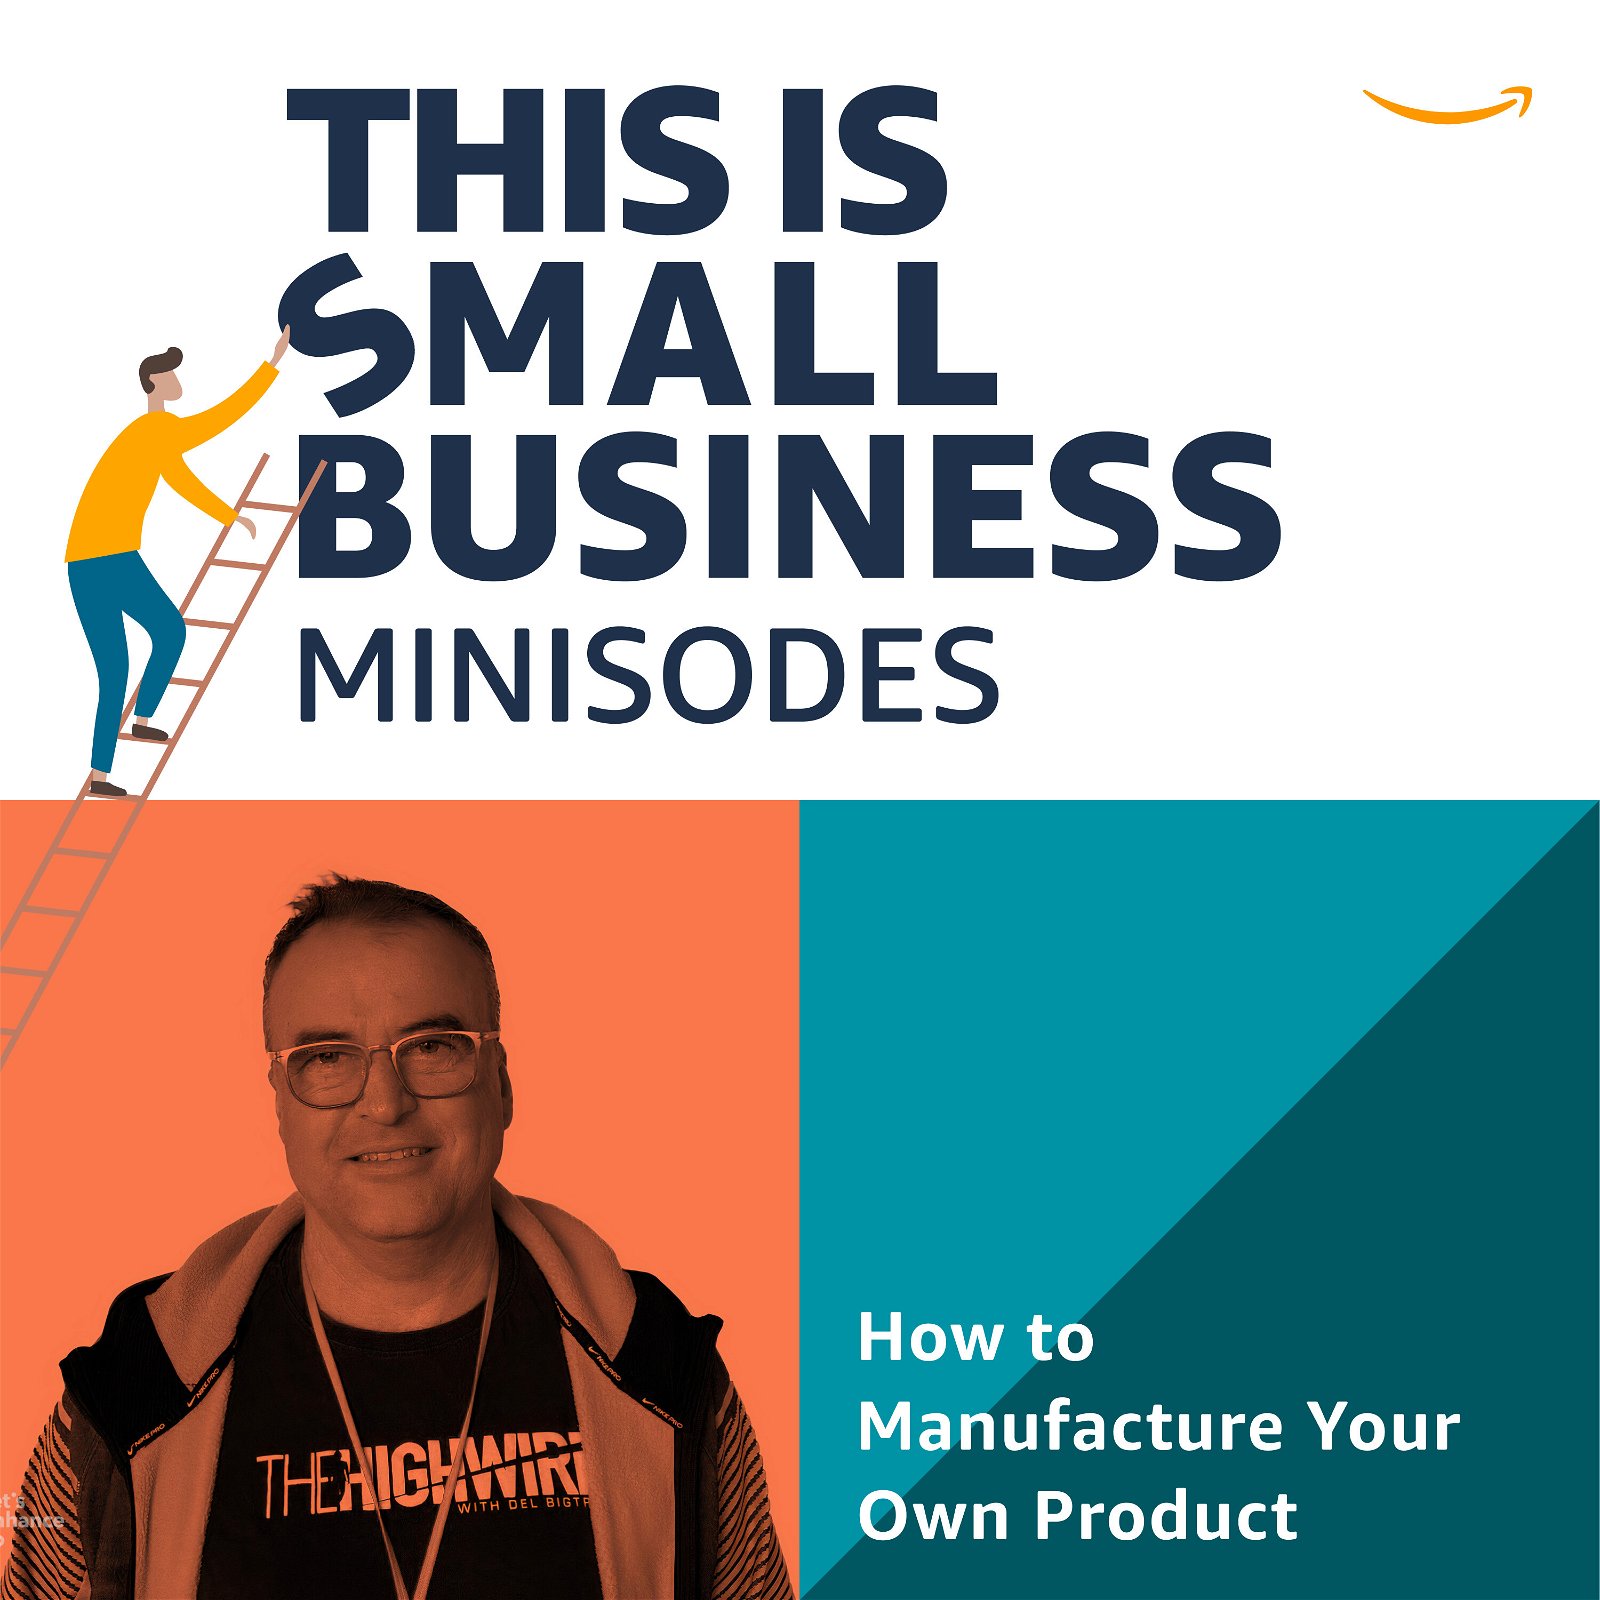 How to Manufacture Your Own Product